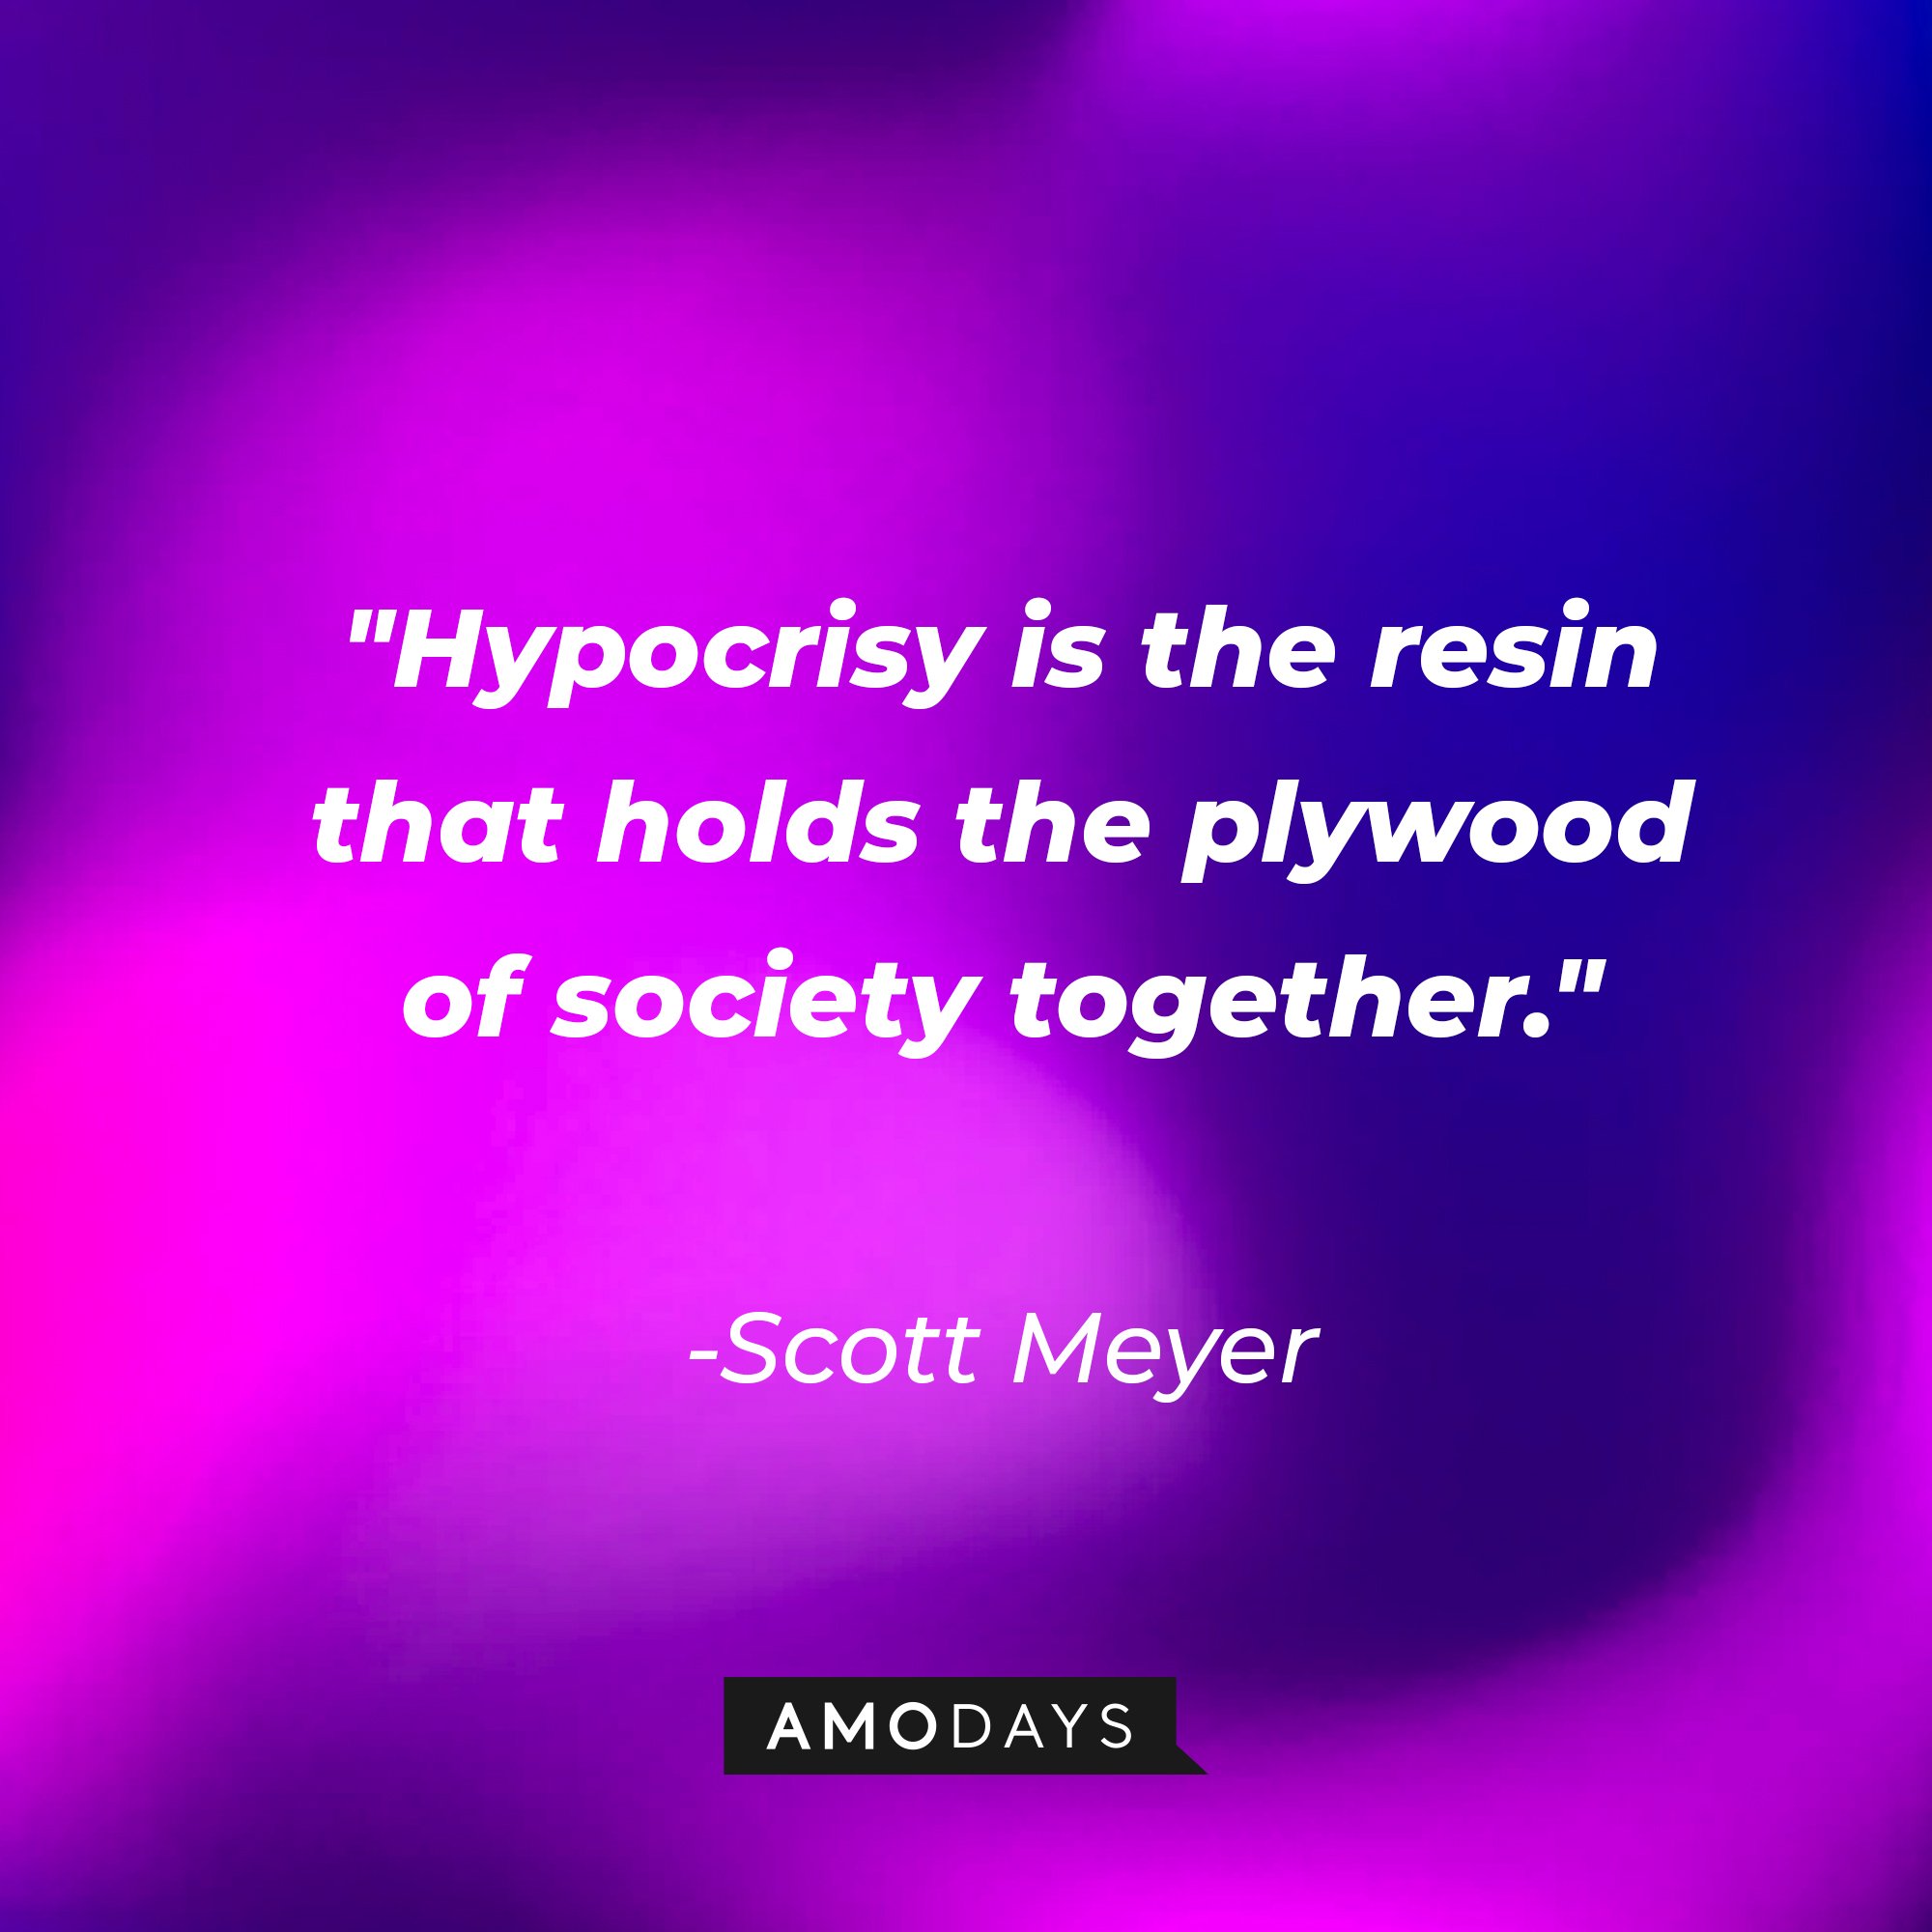 Scott Meyer's quote:\\\\\\\\\\\\\\\\u00a0"Hypocrisy is the resin that holds the plywood of society together."\\\\\\\\\\\\\\\\u00a0| Image: AmoDays